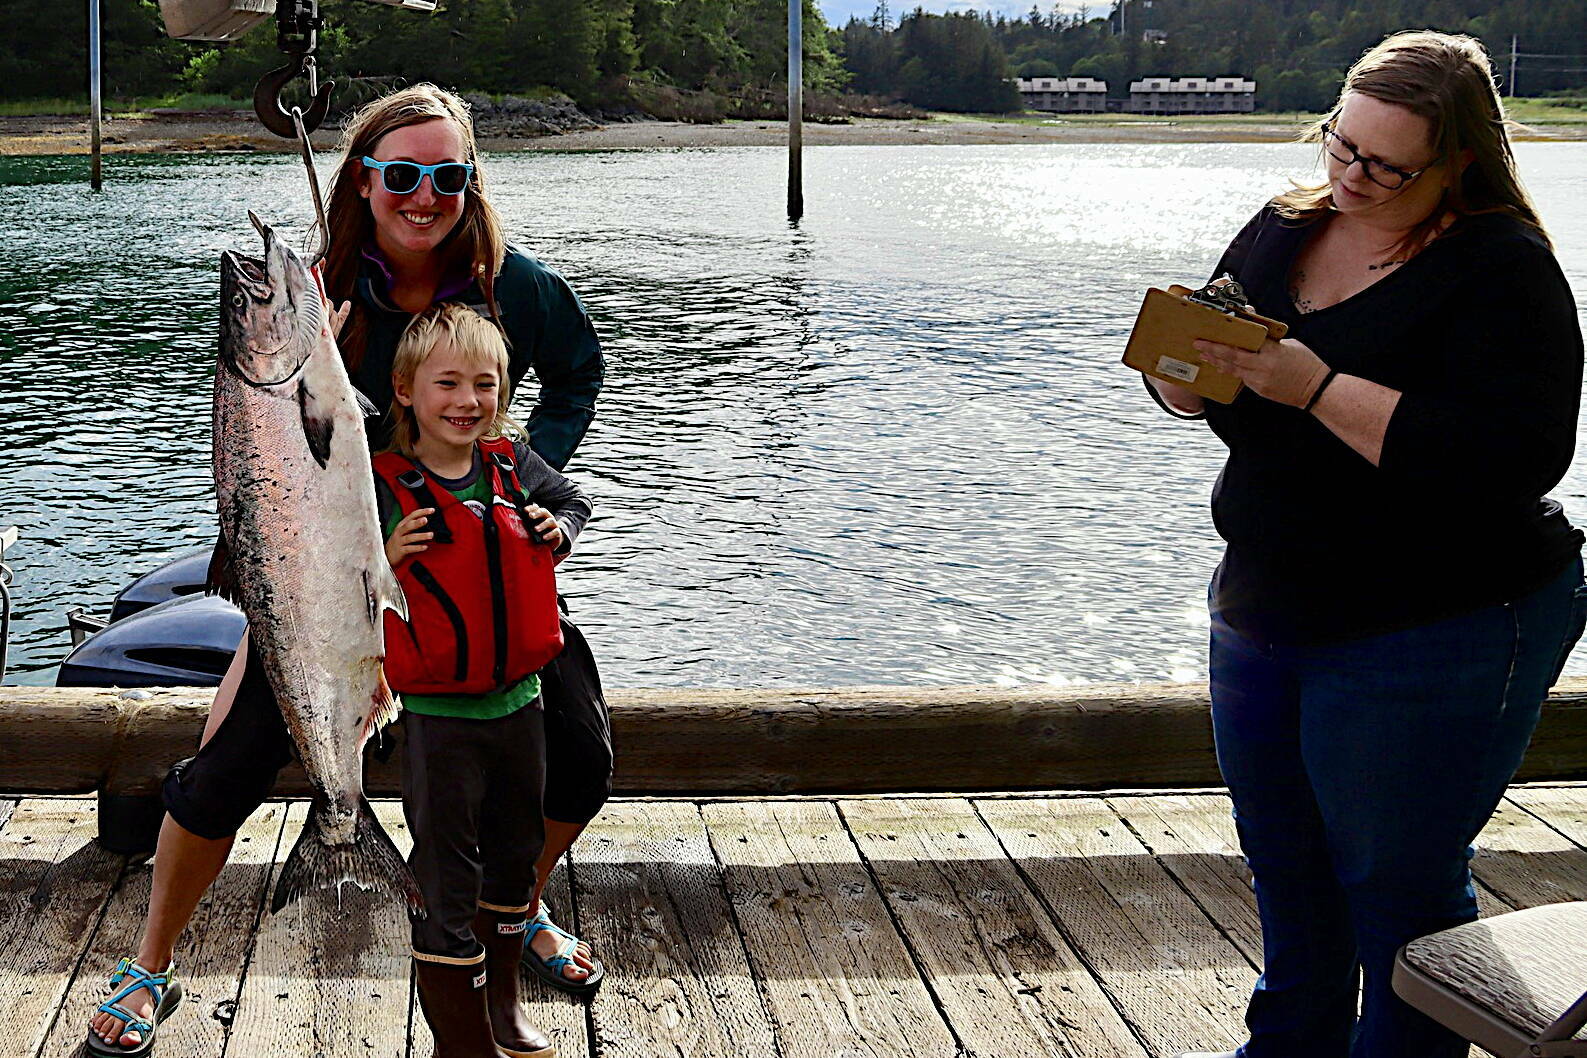 Jackie Ebert, 37, and her son William Oliver Dryer, 6, stand behind a fish he caught on Friday, the first day the 77th annual Golden North Salmon Derby, at the Auke Nu Cove weigh station. A few minutes earlier Ebert turned in a 14.2-pound fish, narrowly edging out a 14 pounder that was the heaviest at that point in the day. (Meredith Jordan / Juneau Empire)